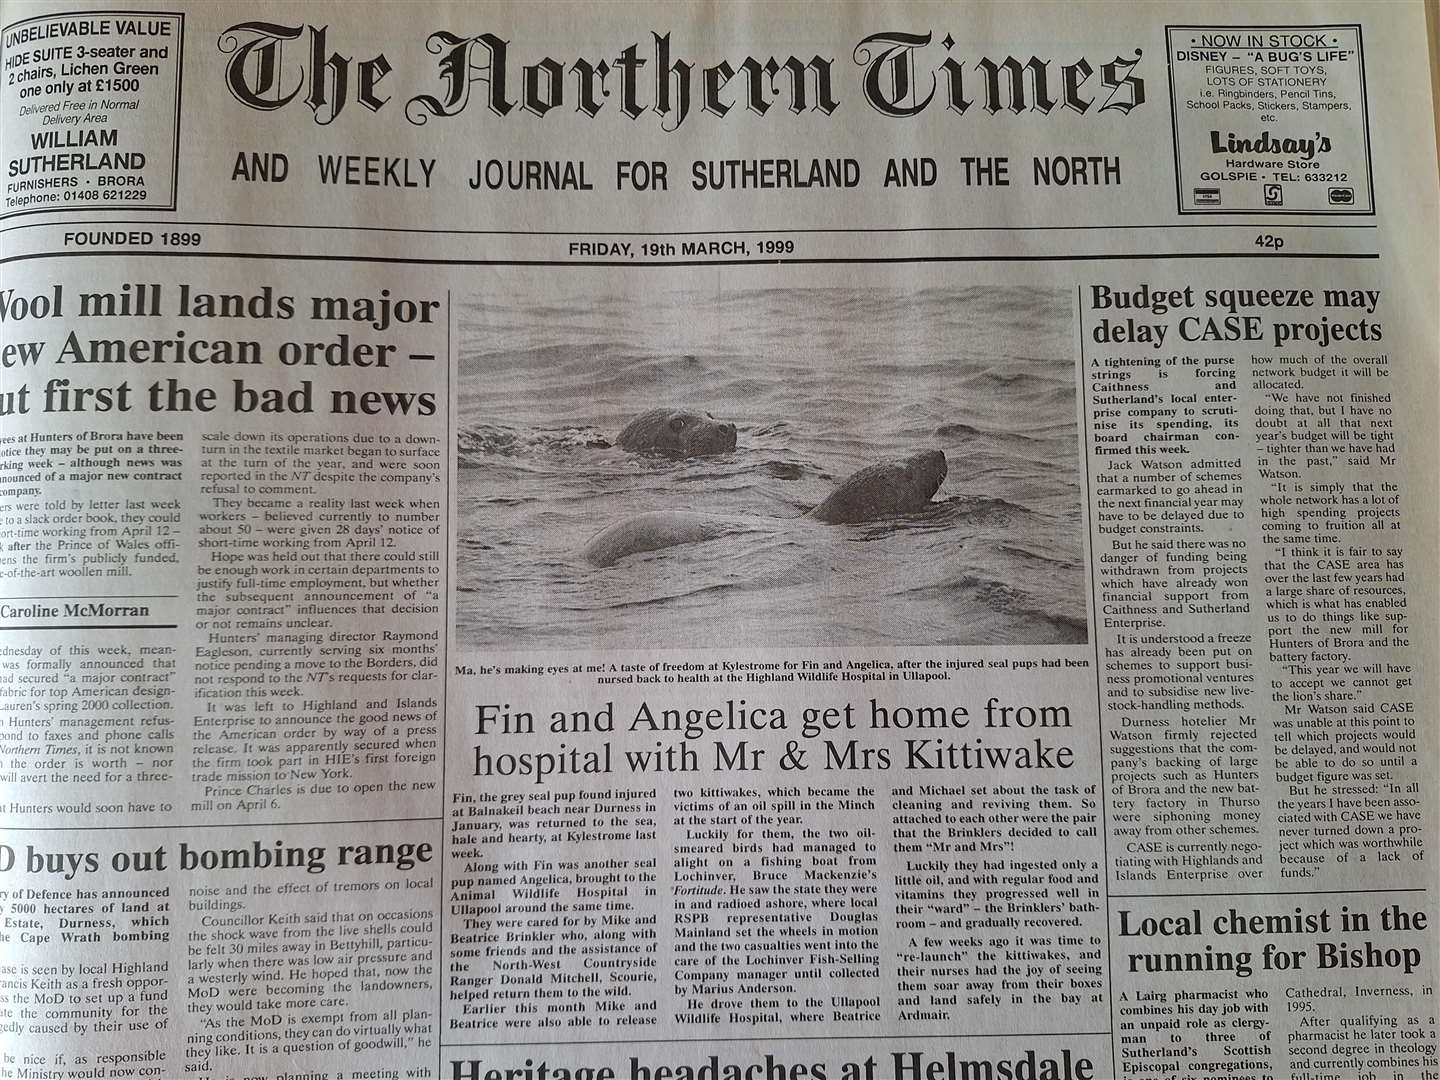 The edition of March 19, 1999.